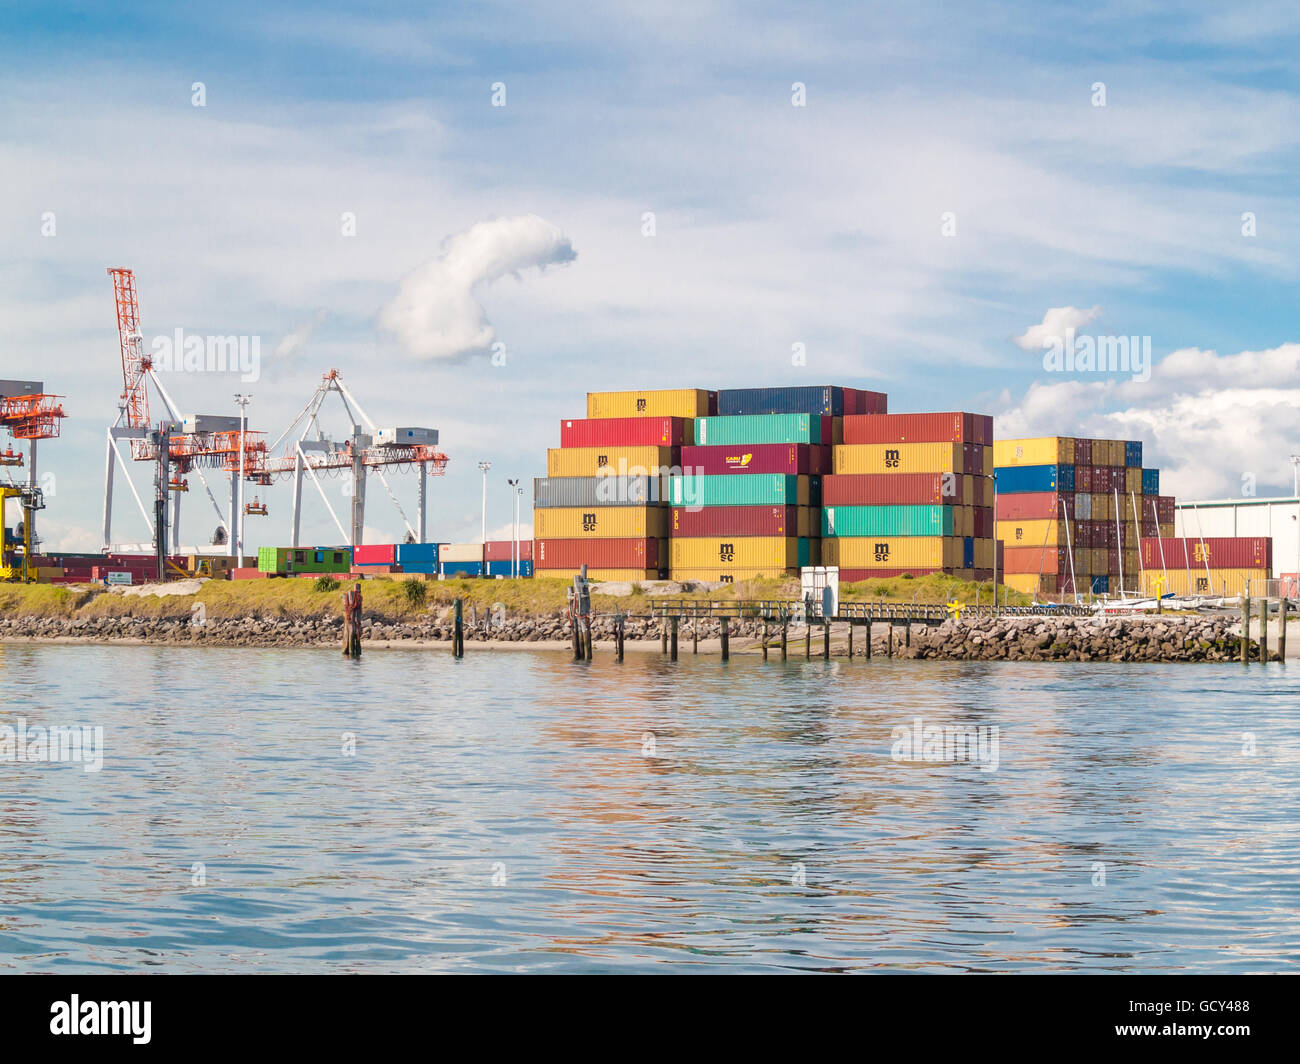 Port container terminal Tauranga Sulphur Point multi-color containers stacked near wharf cranes Stock Photo